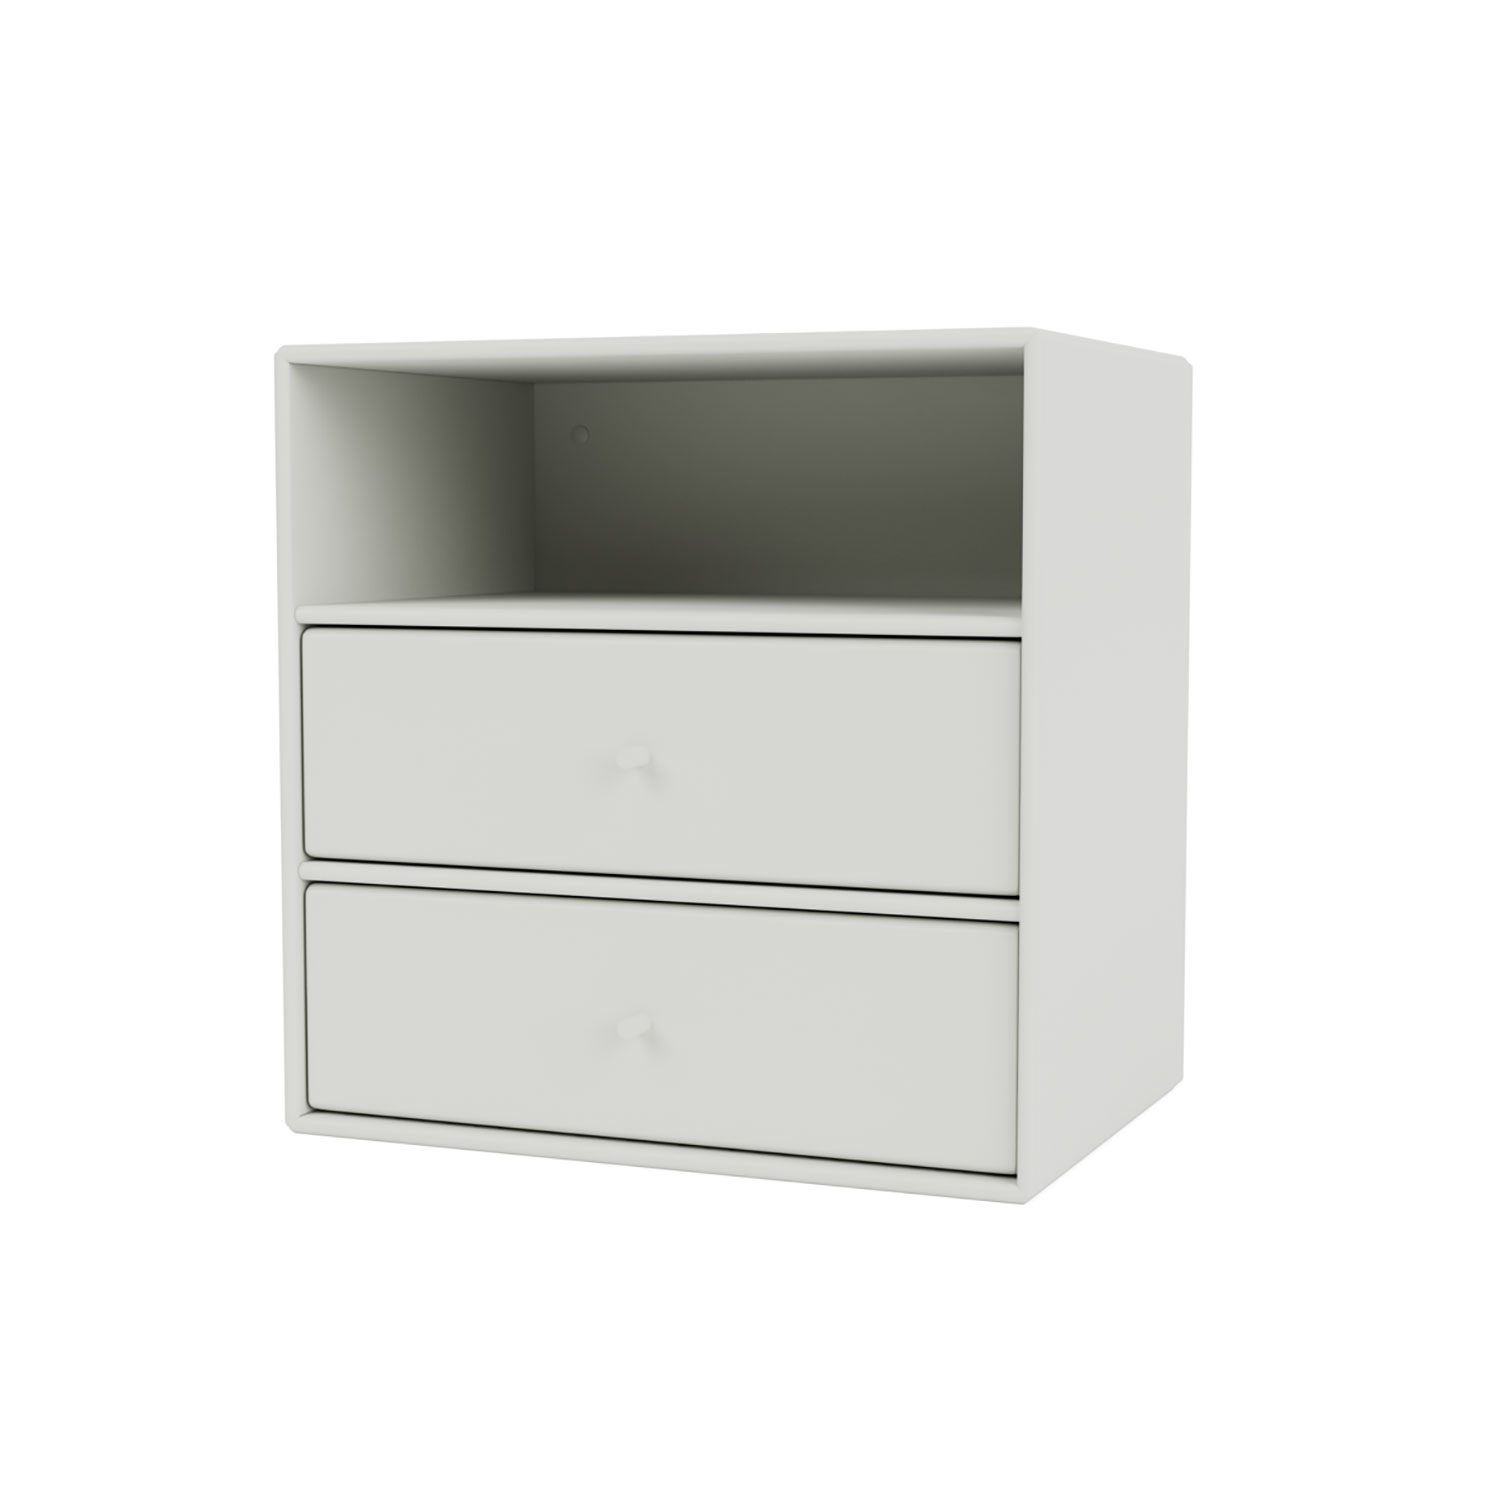 Mini 1006 with two drawers, 4 colors